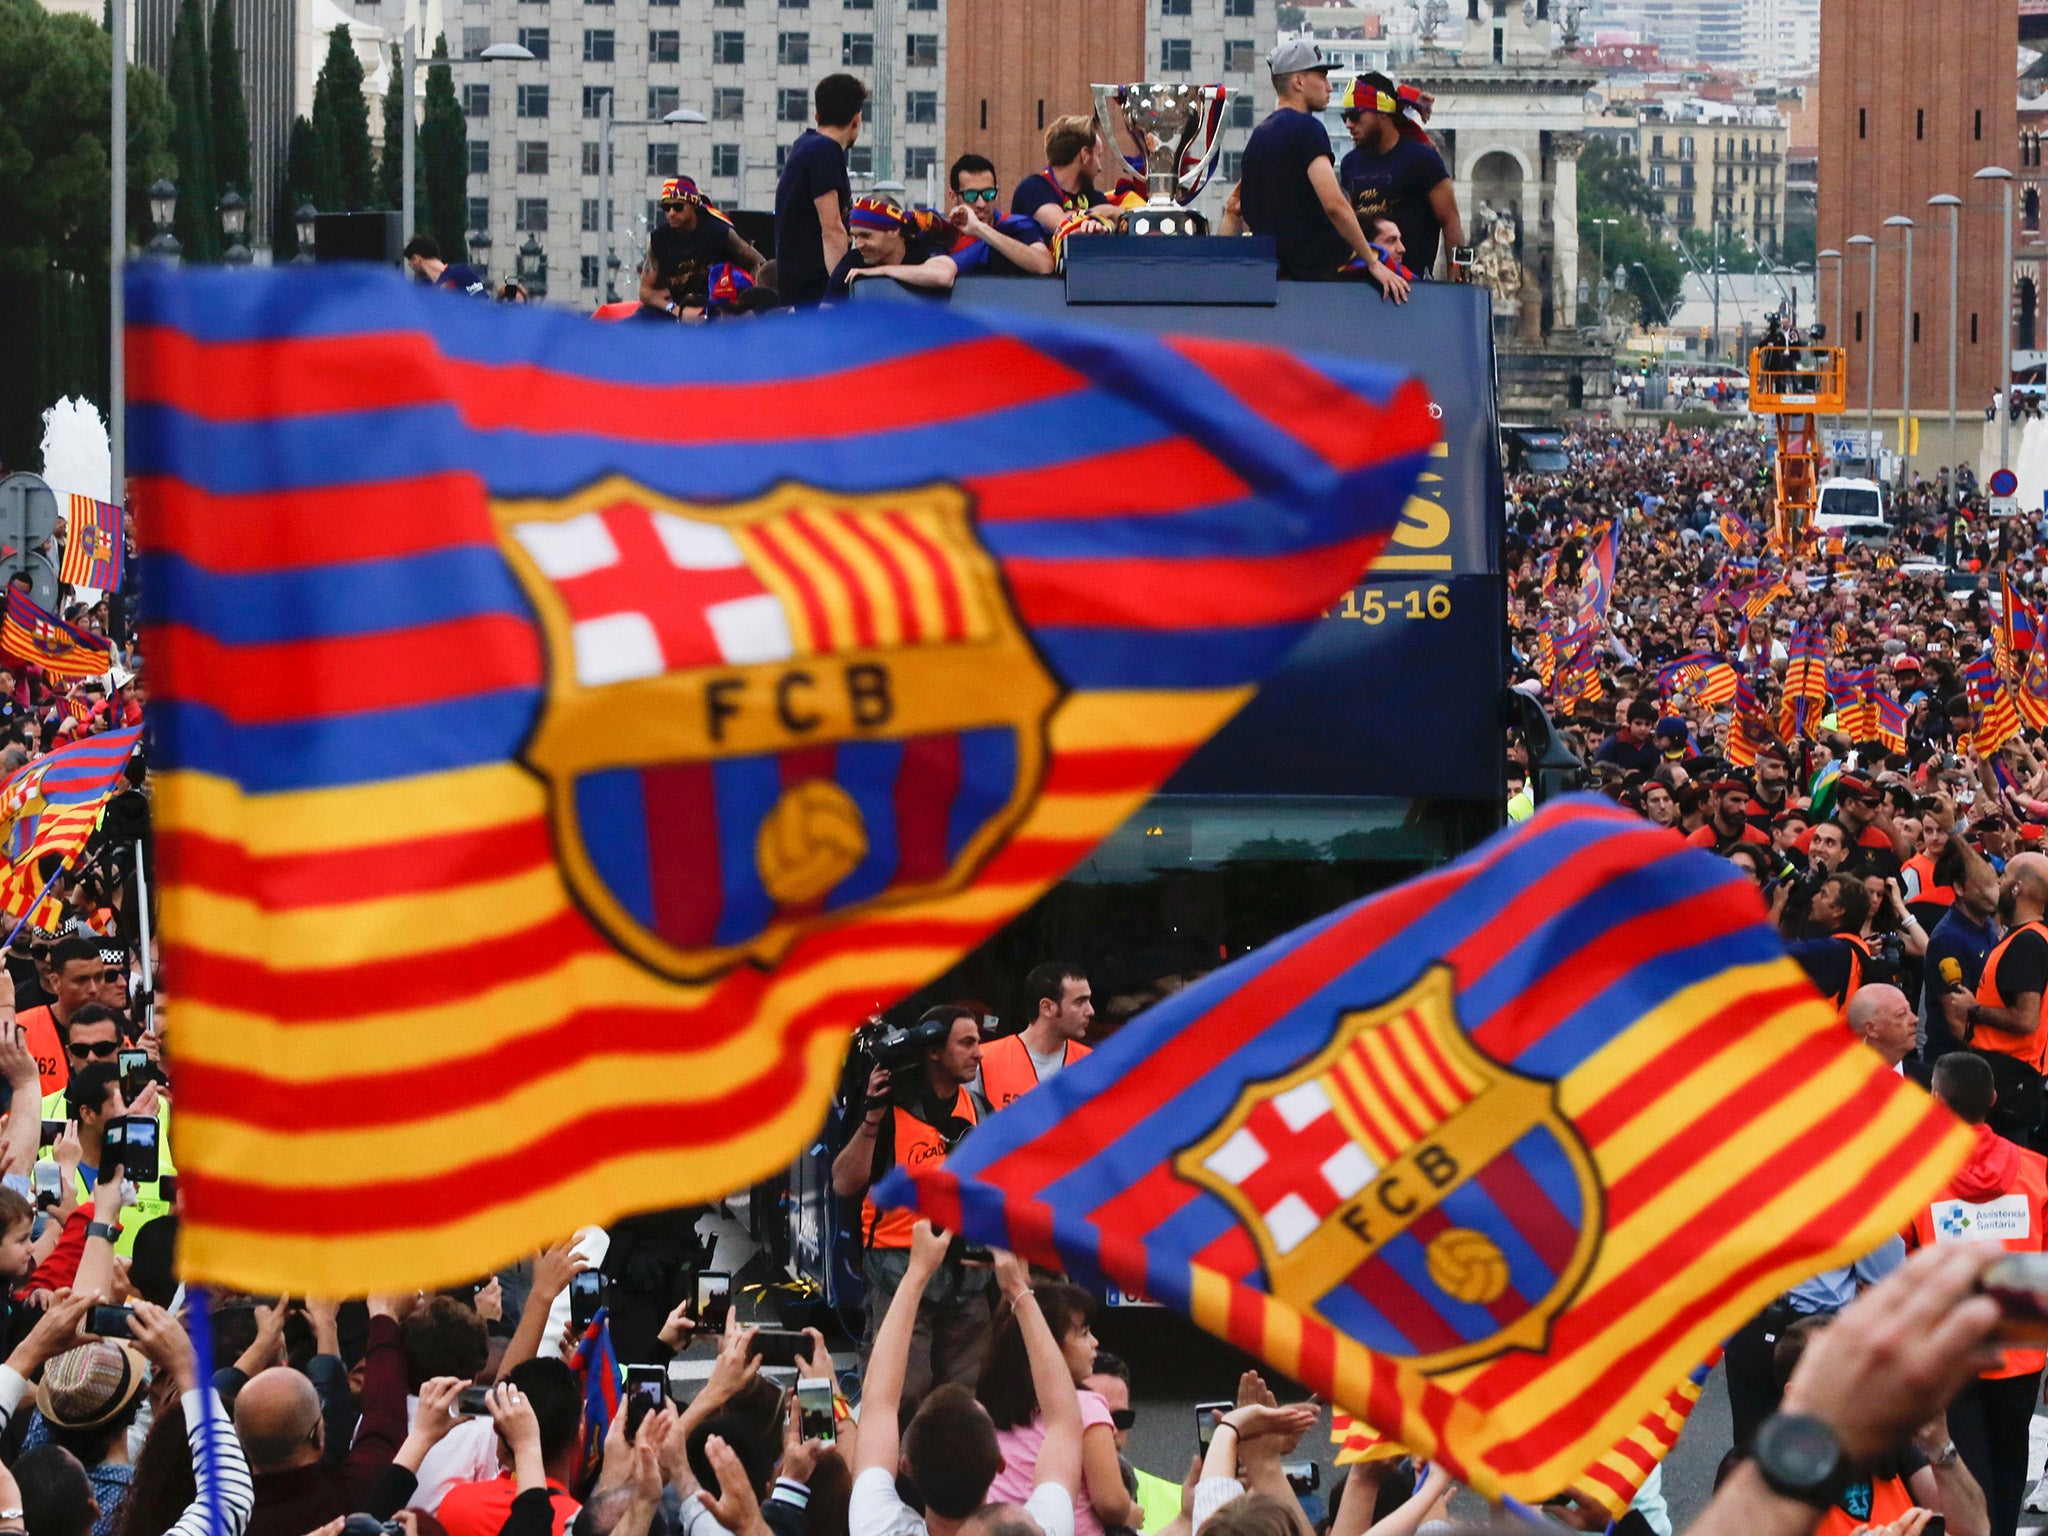 Barcelona fans have been banned from displaying the 'Estelada' flag at the Copa del Rey final